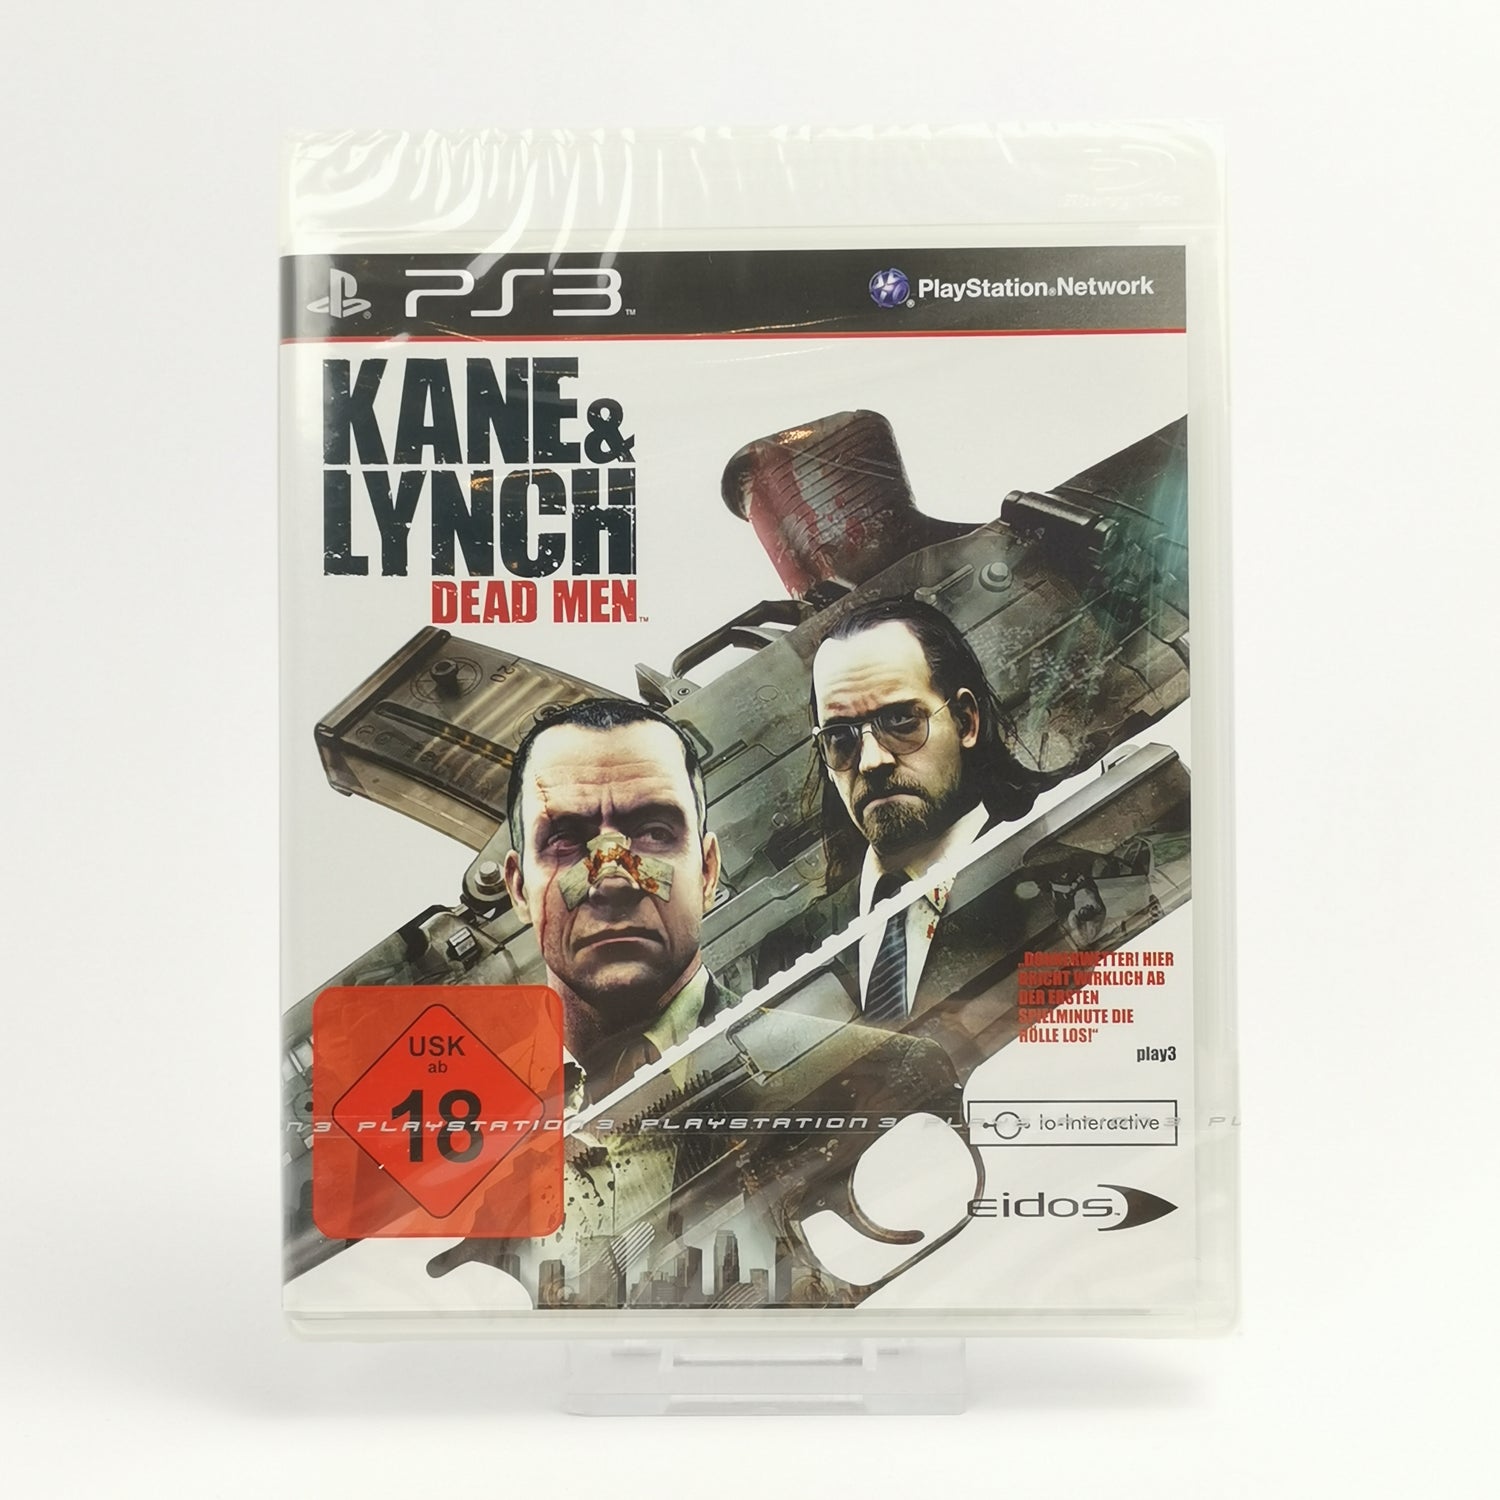 Sony Playstation 3 Game: Kane & Lynch Dead Men | PS3 Game - USK18 NEW SEALED